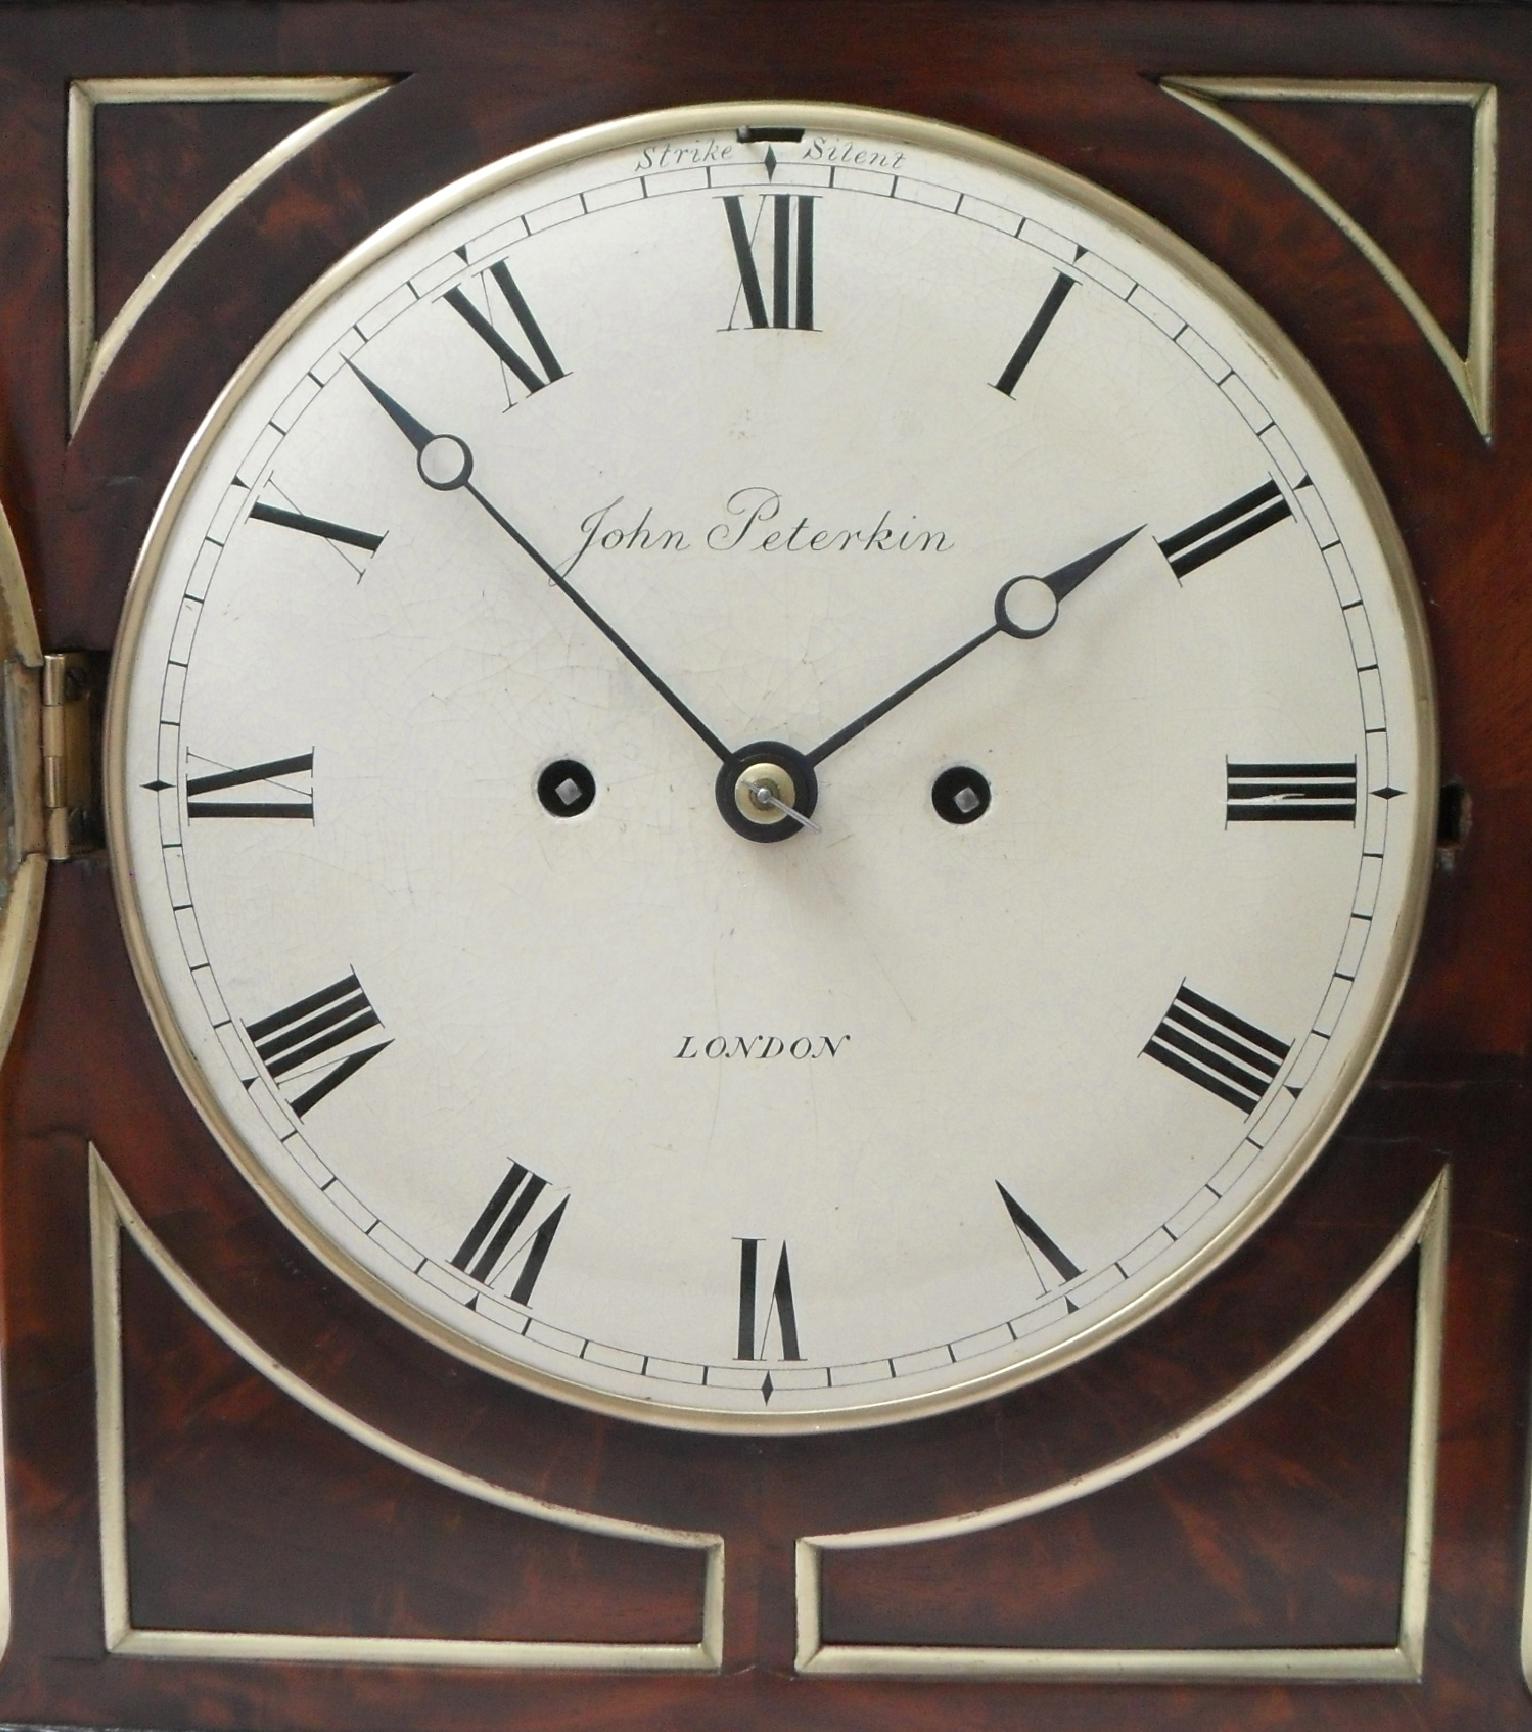 A very good quality English figured mahogany chamfer top bracket or table clock with ebony mouldings, brass string inlay, inset corner panels with brass moulded edges to the front stood on brass ball feet. The clock has fish scale sound frets and